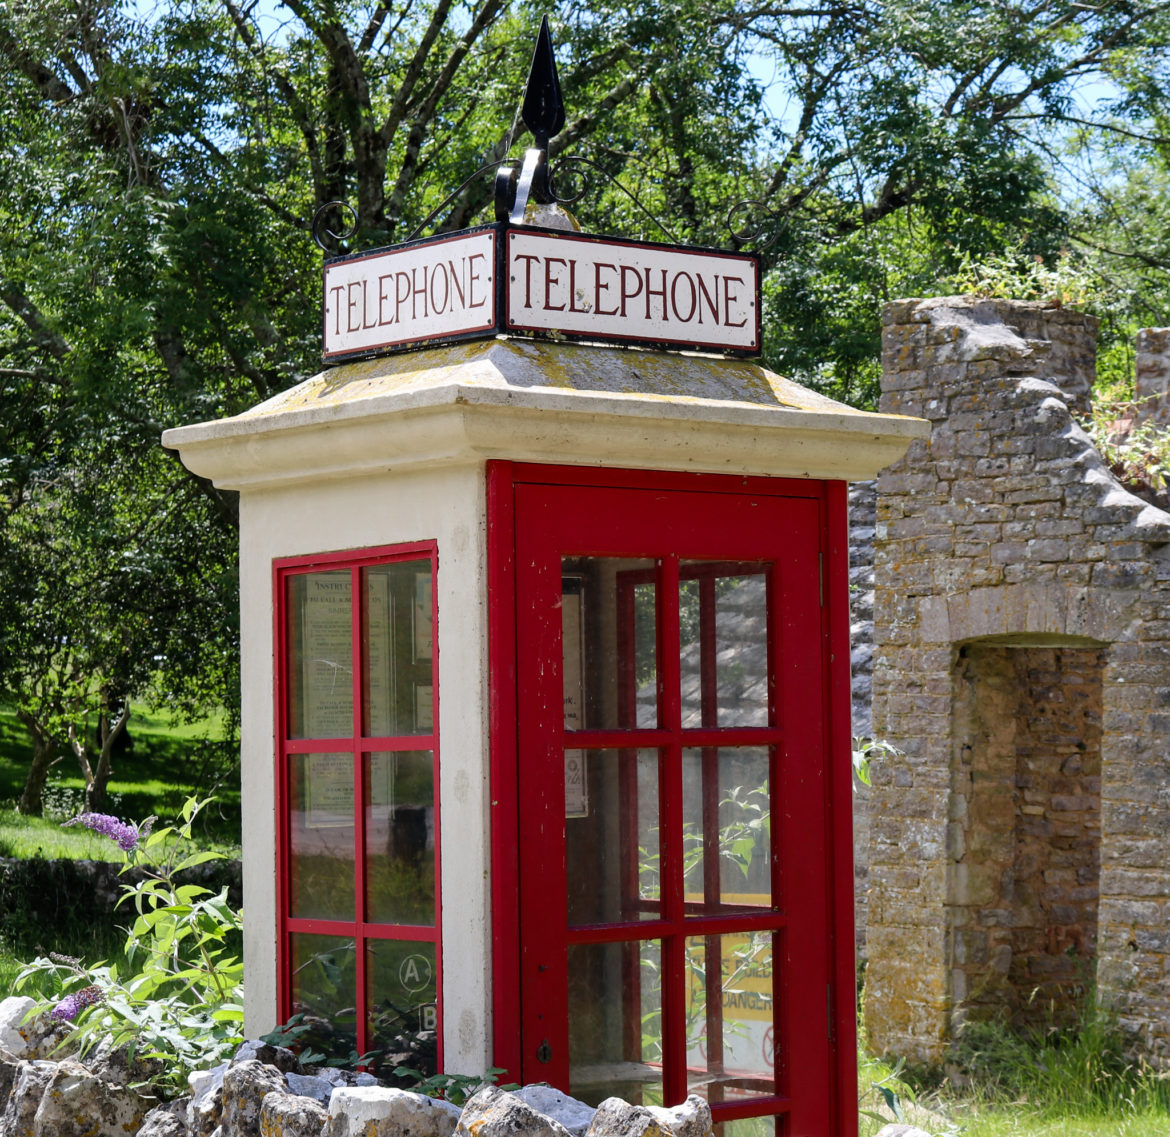 Red and white vintage telephone box replica in Tyneham village